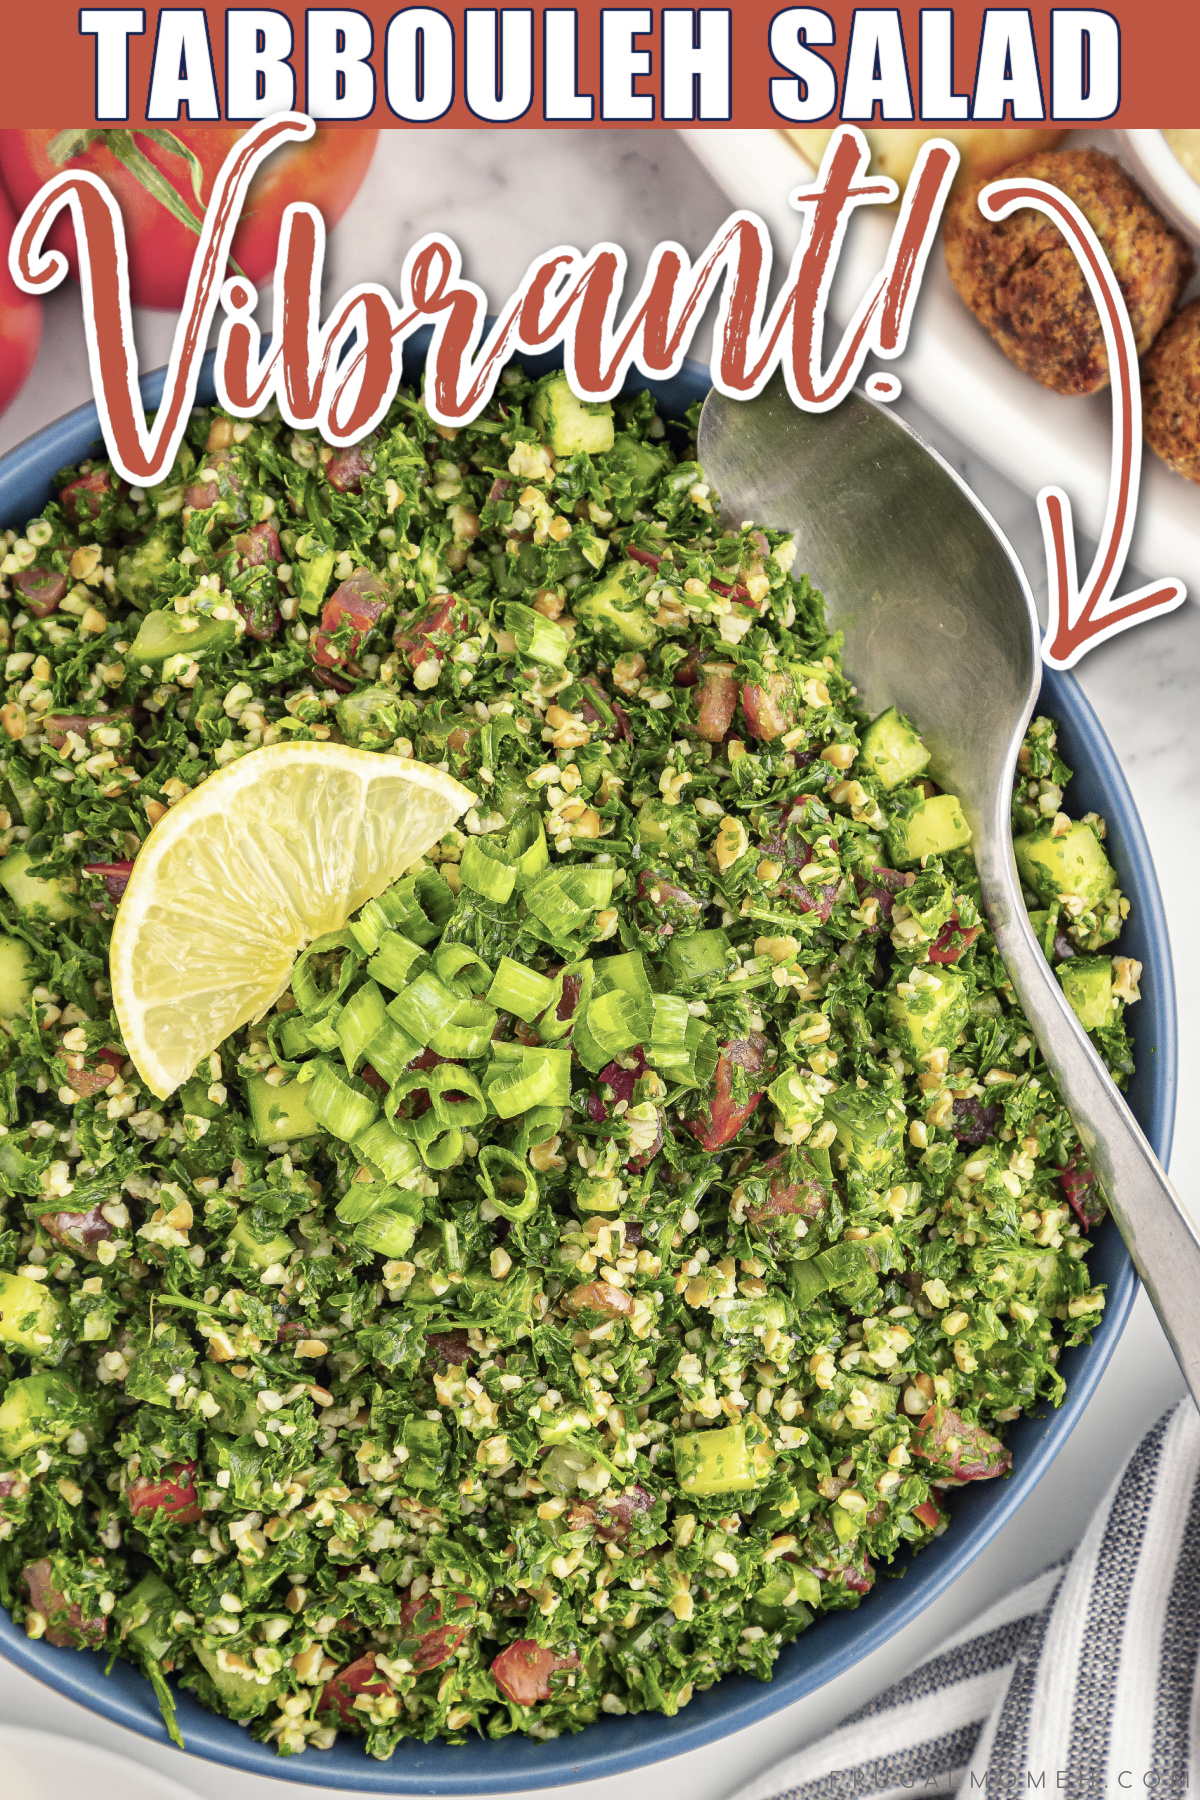 Get ready to whip up a fresh and delicious Mediterranean favourite with this step-by-step guide on how to make the perfect tabbouleh salad.